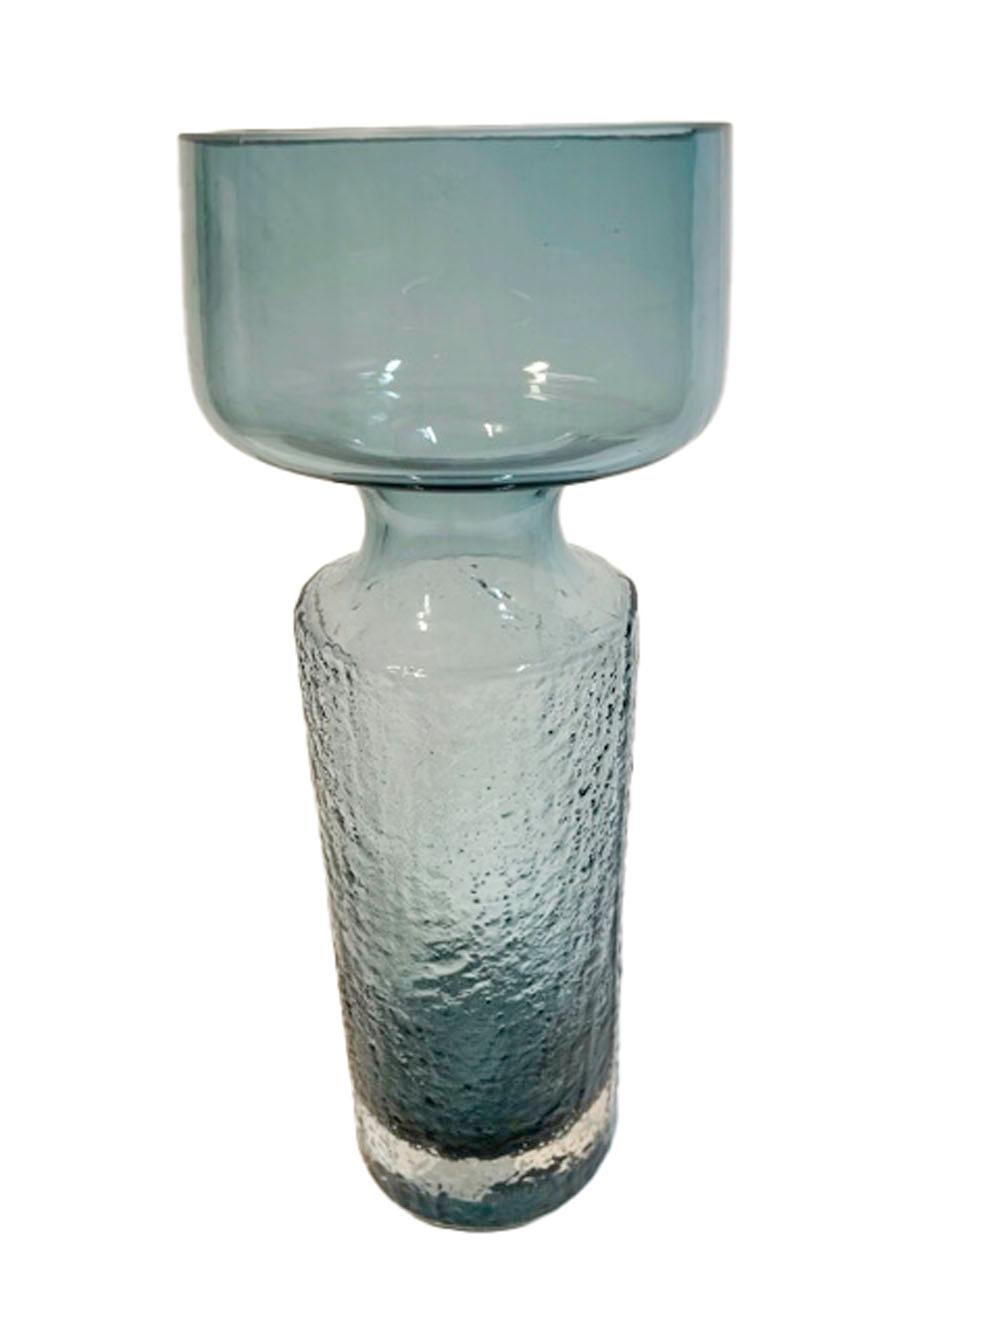 Mid-Century Modern Riihimaki 'Safari' vase in steel blue and clear cased glass. The large vase having a cylindrical base with pebble textured surface below a narrowed collar opening to a larger bowl, the pebble texture fades through the narrowed